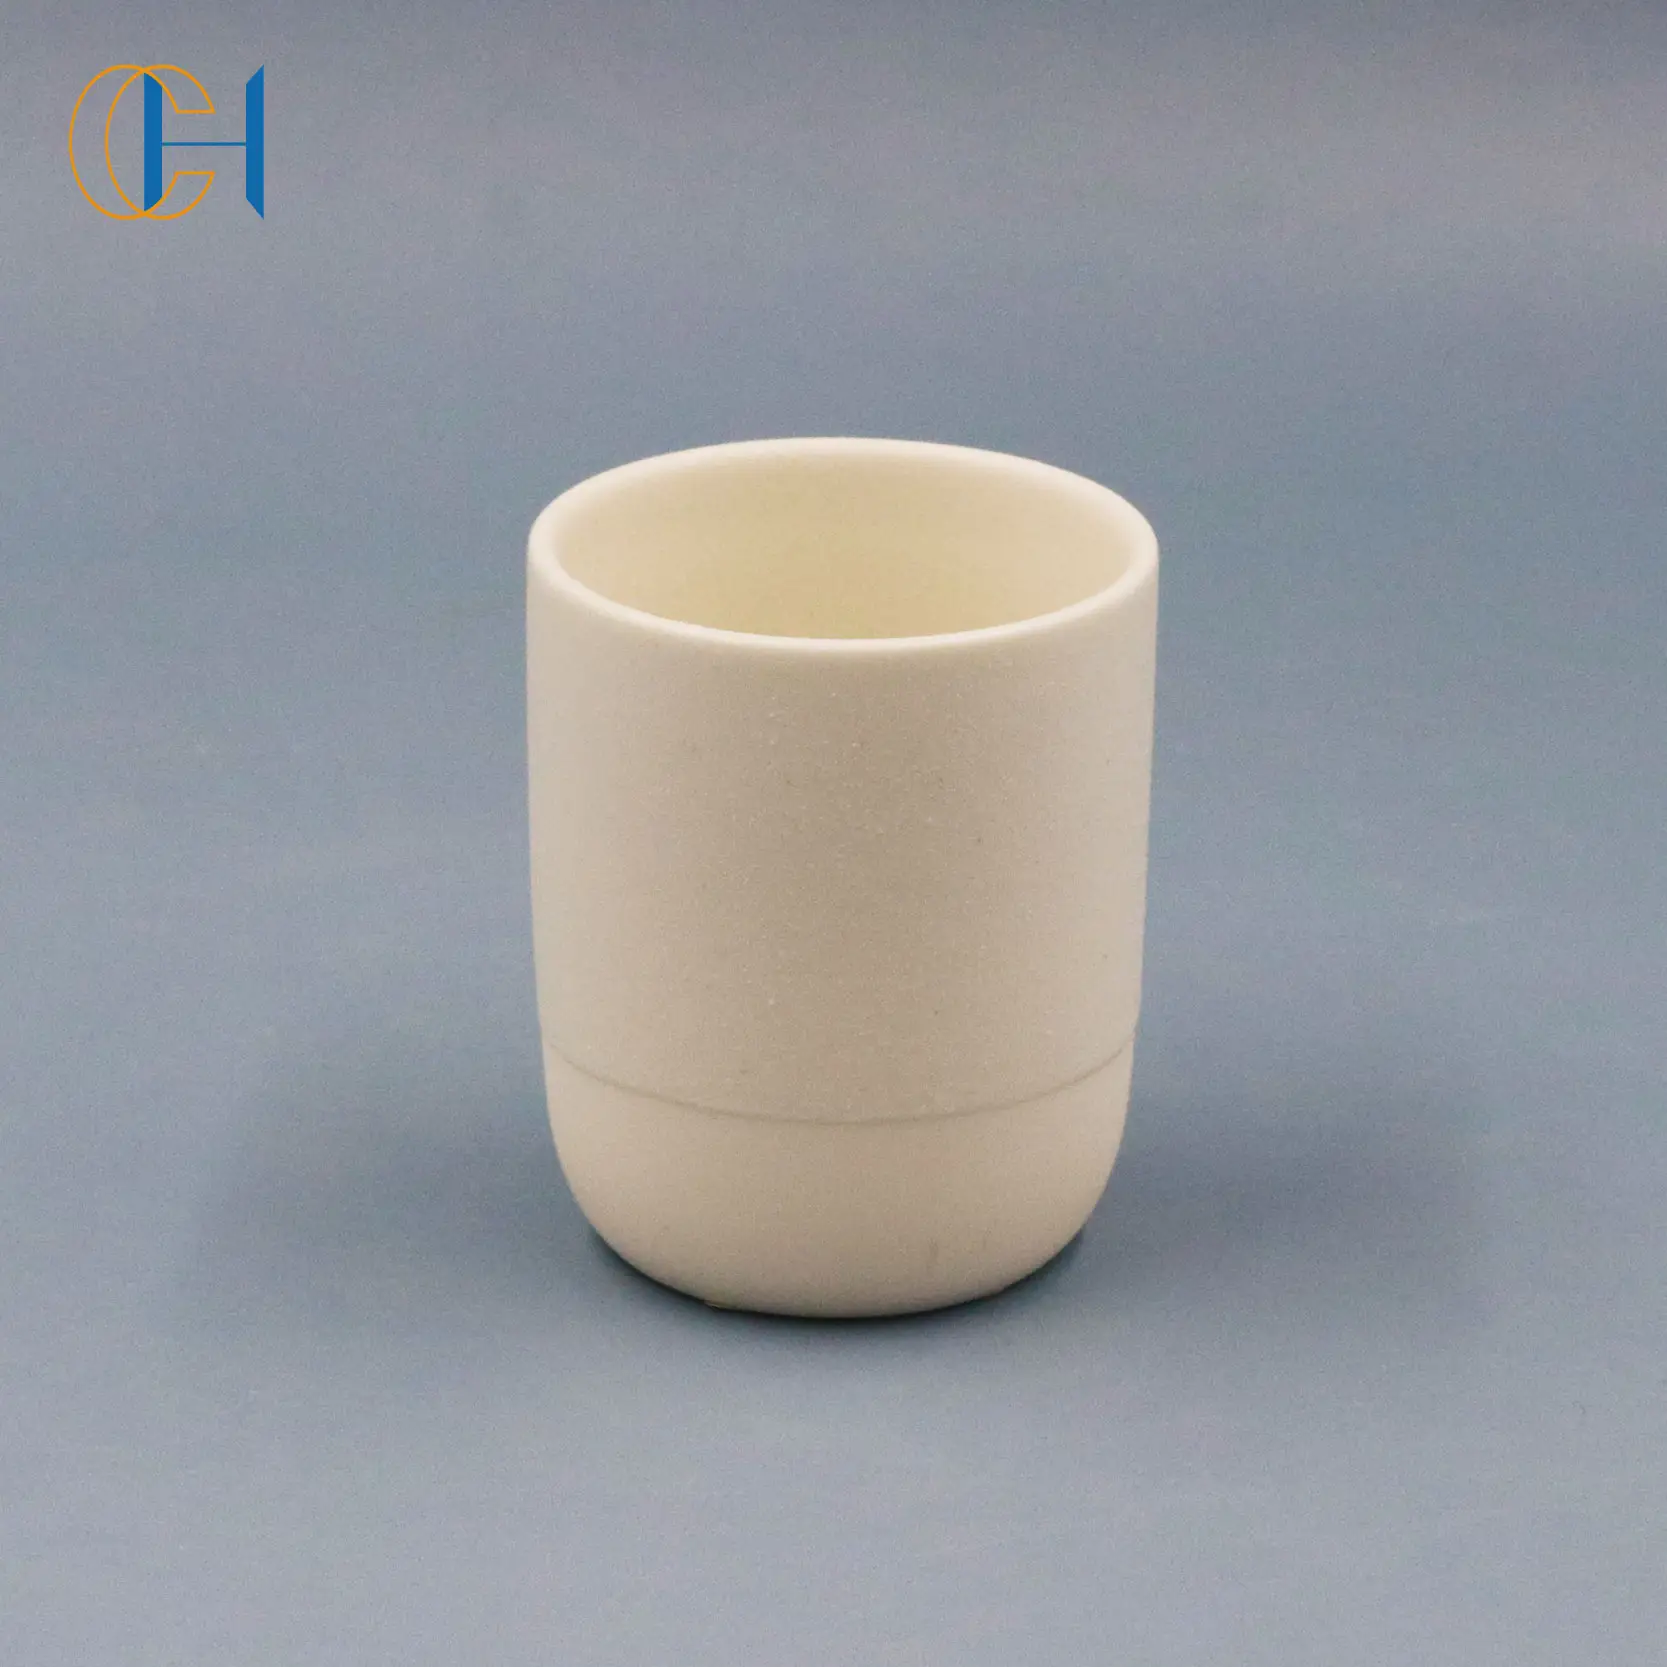 Minimalism style home decoration table decor handcrafted Charisma Gift Luxury ceramic candle jar with lid